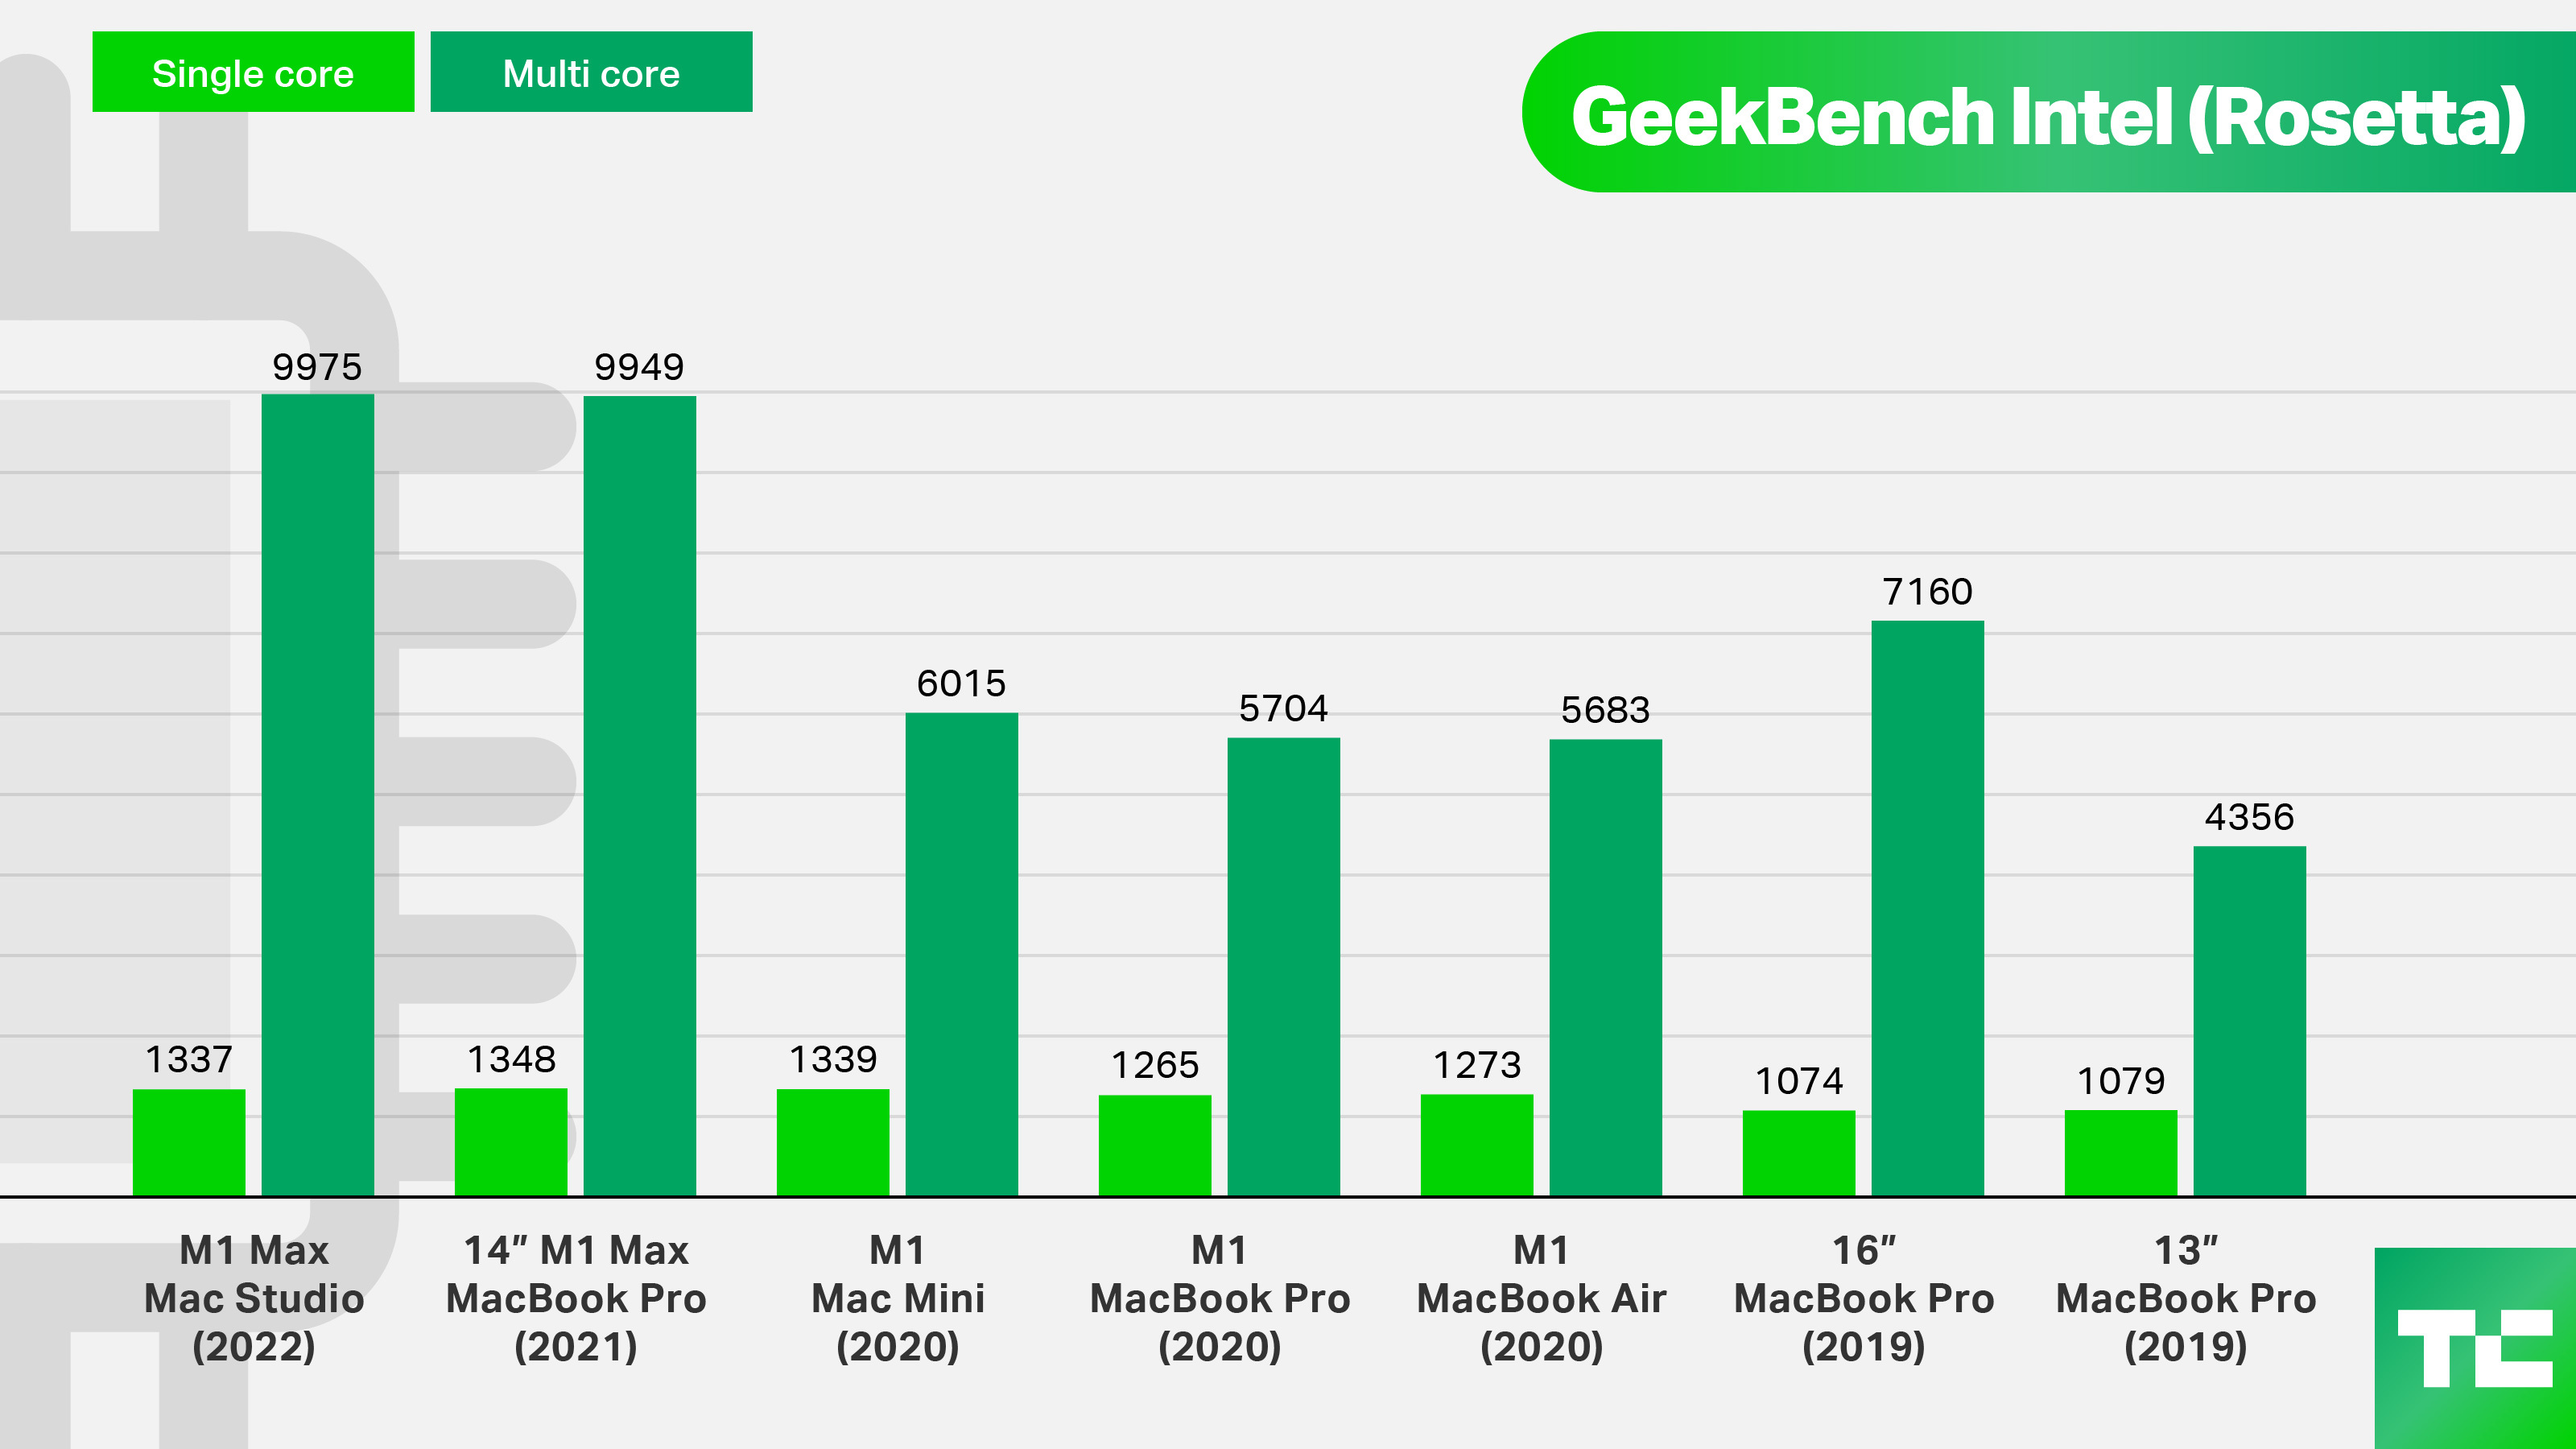 Pricing comparison graph with other Apple Mac products from the past, GeekBench Intel (Rosetta)